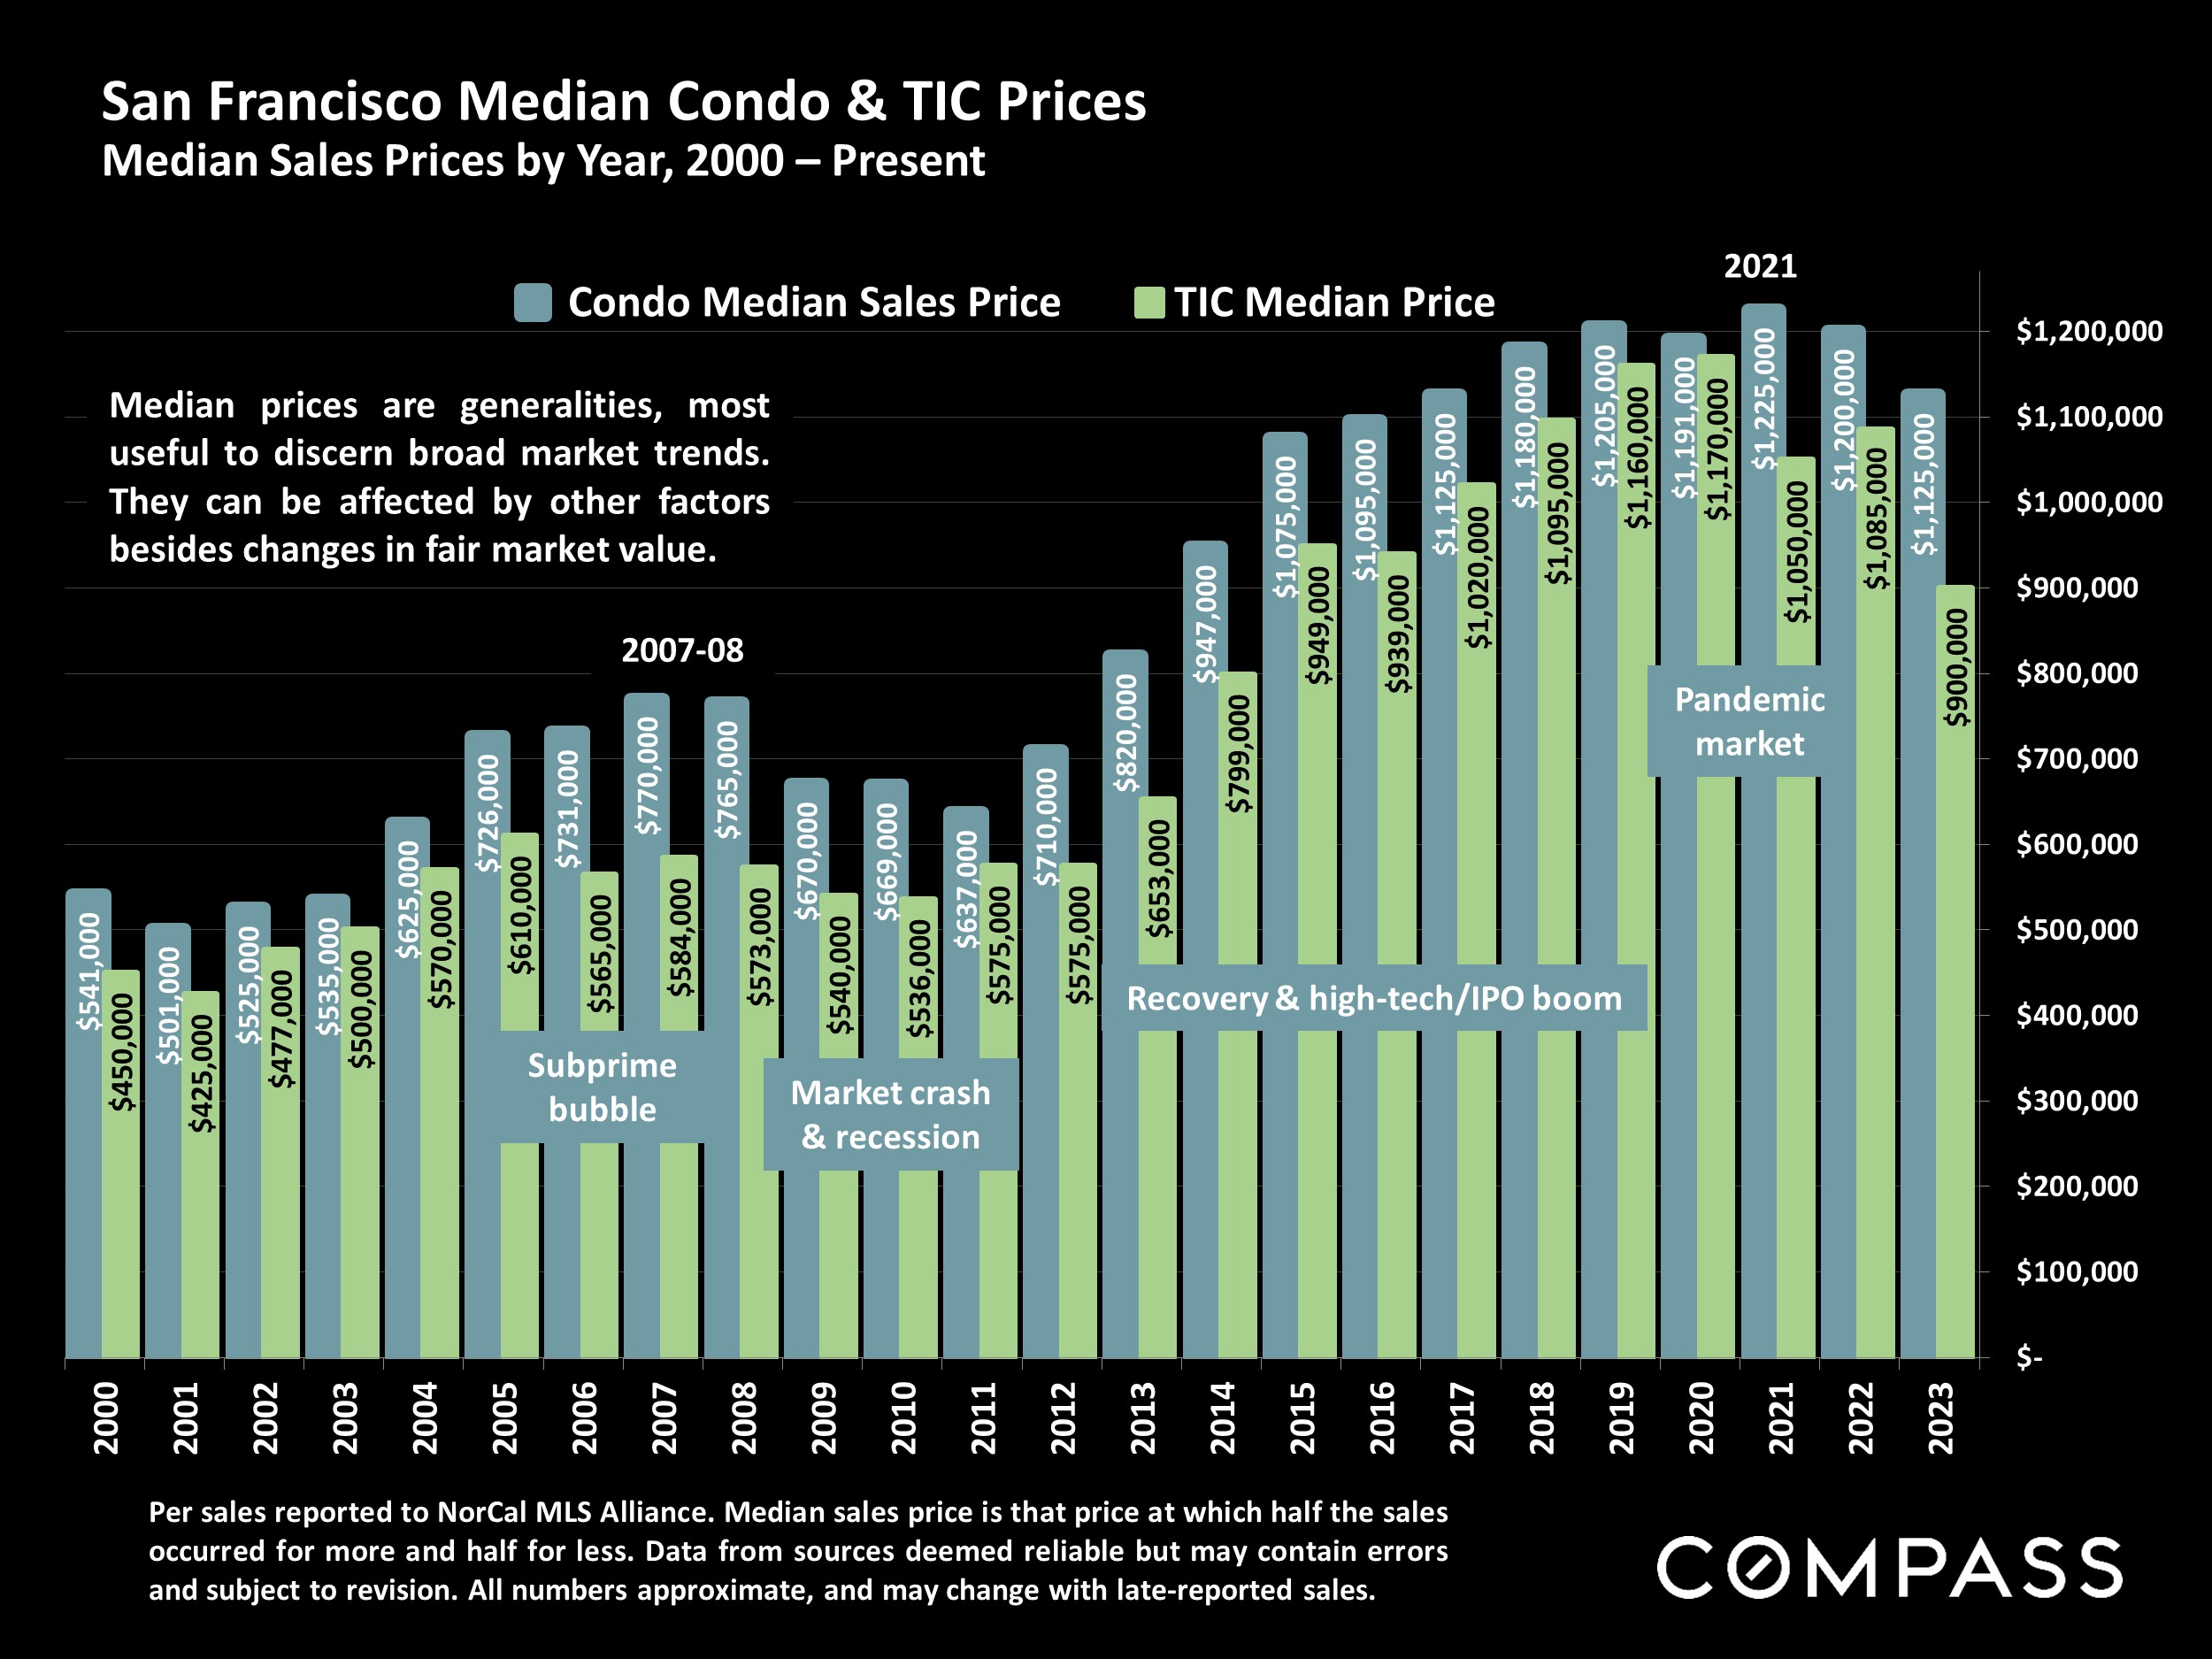 San Francisco Median Condo & TIC Prices.Median Sales Prices by Year, 2000 - Present